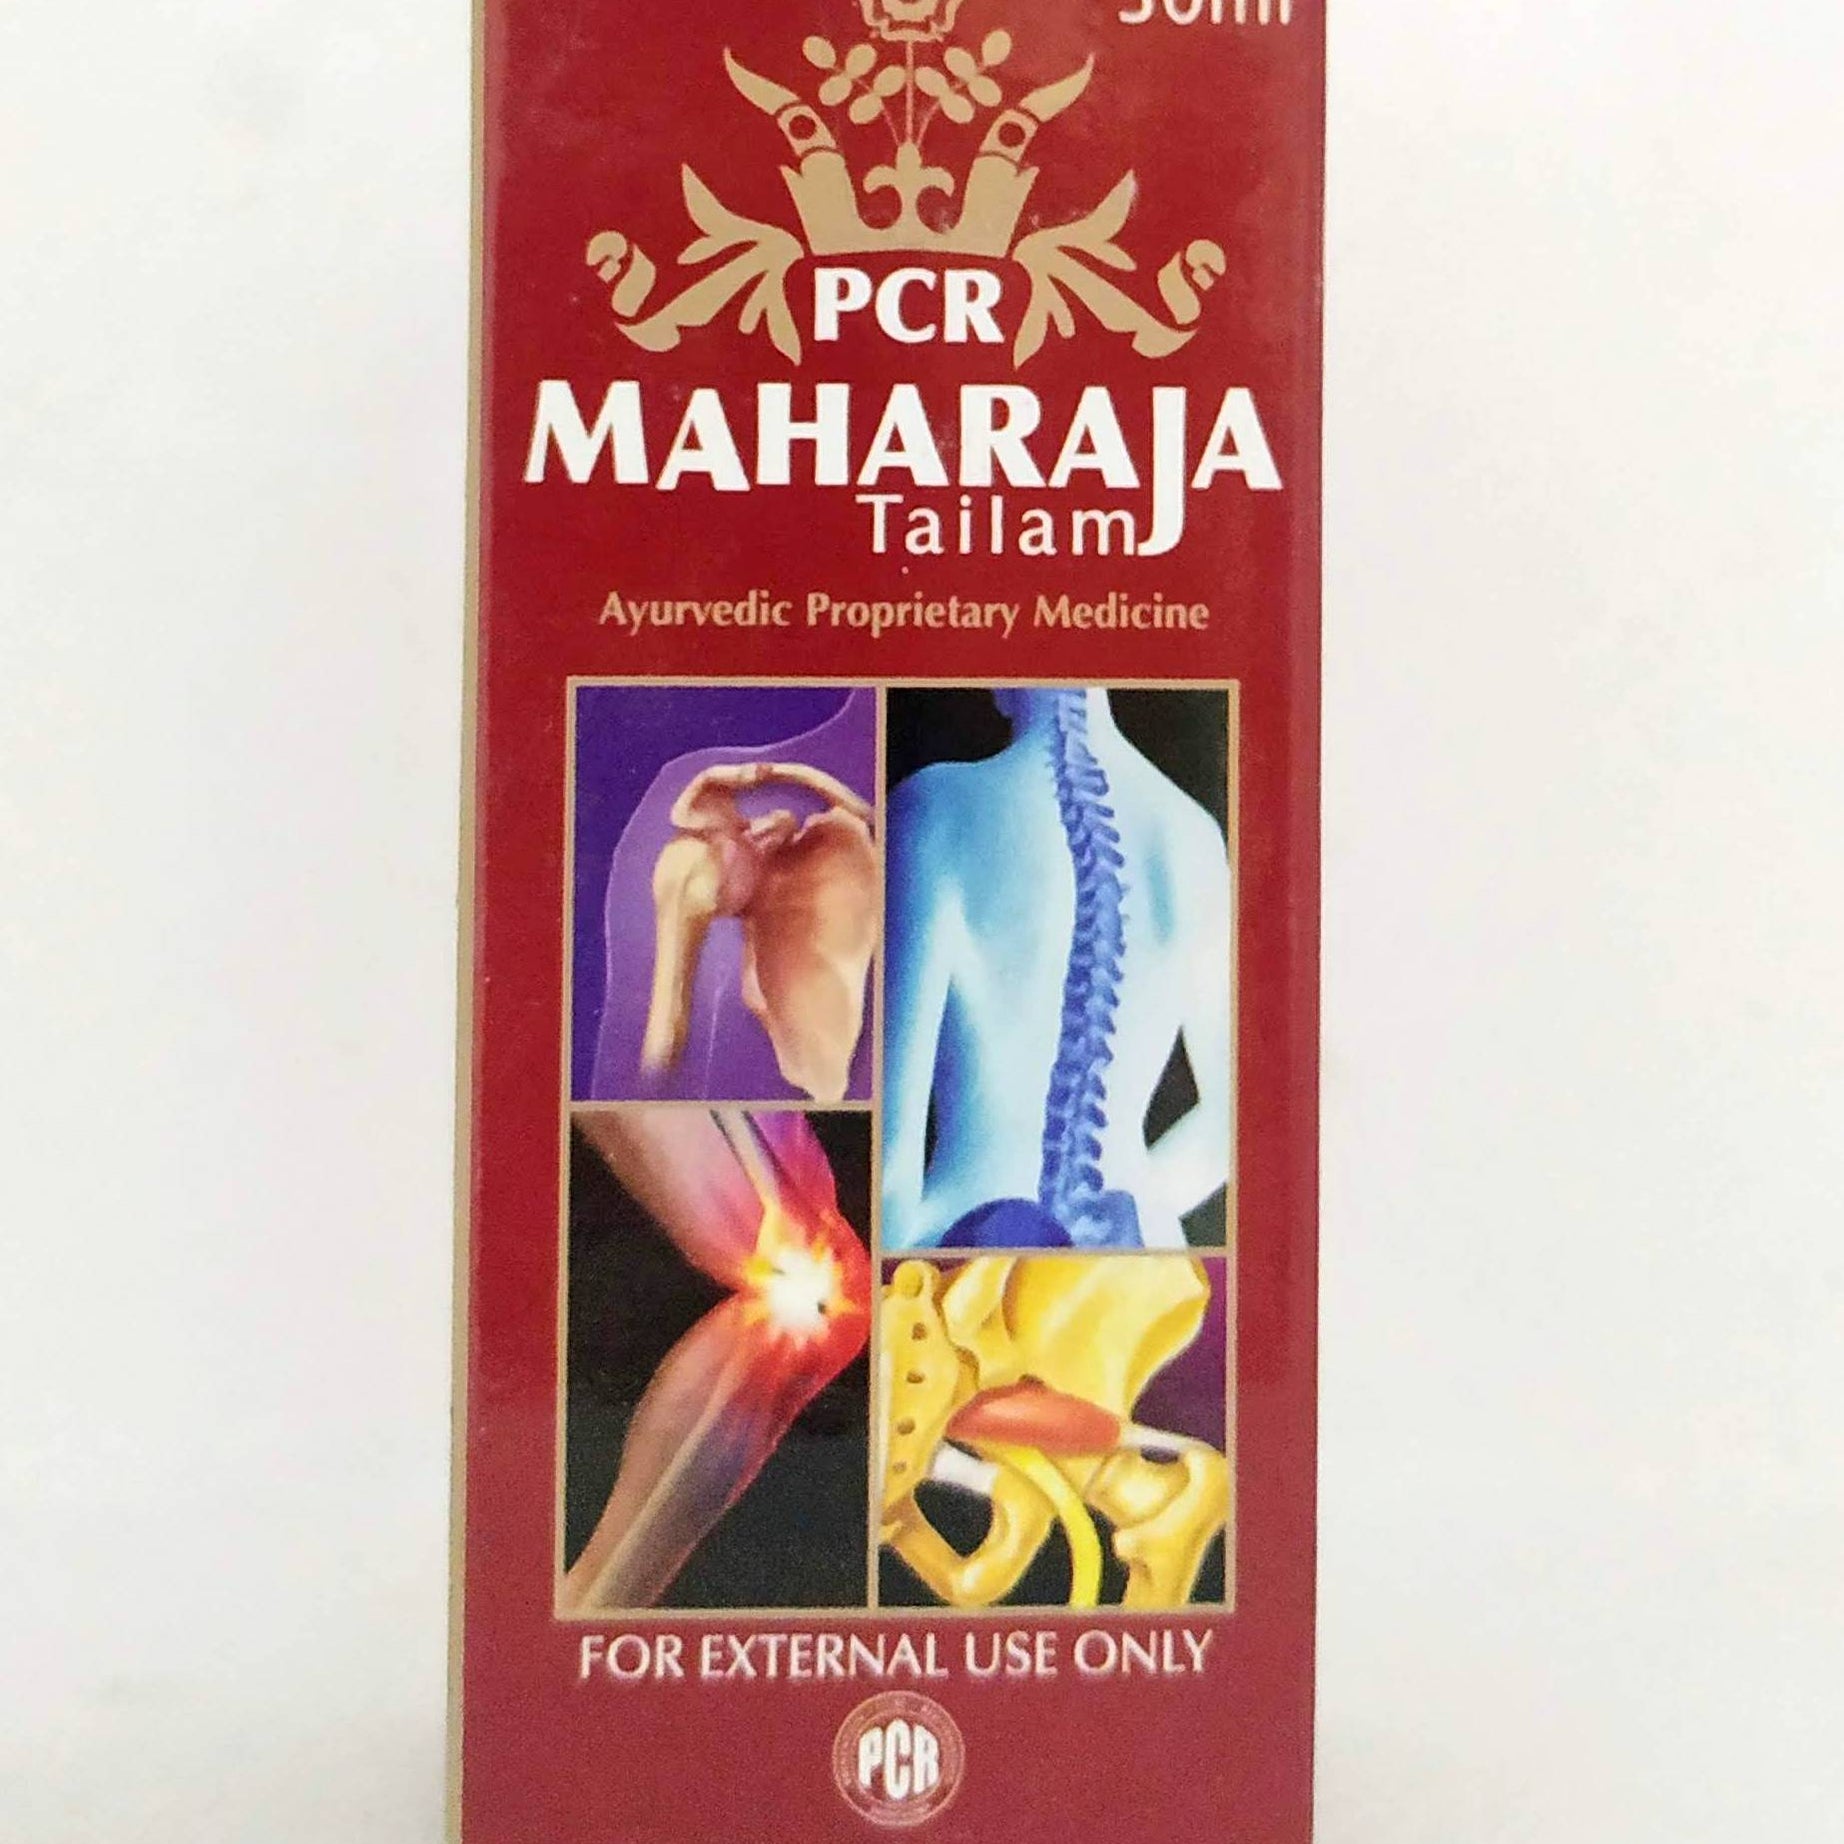 Shop Maharaja thailam 30ml at price 65.00 from PCR Online - Ayush Care